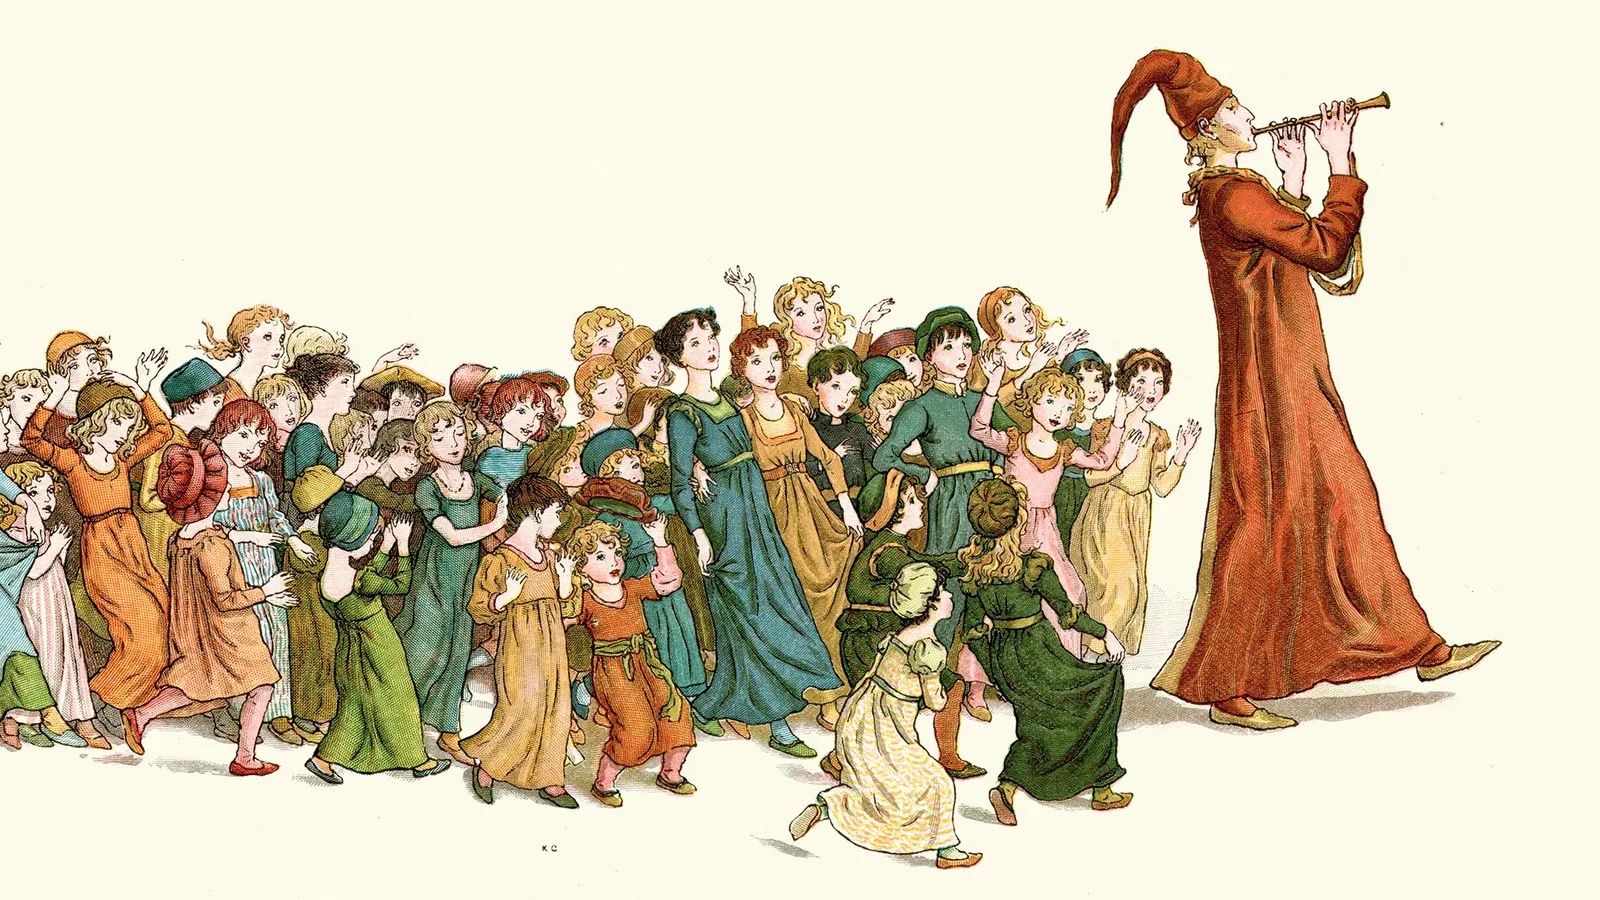 An illustration of a group of children following a person playing a flute in a vintage style.